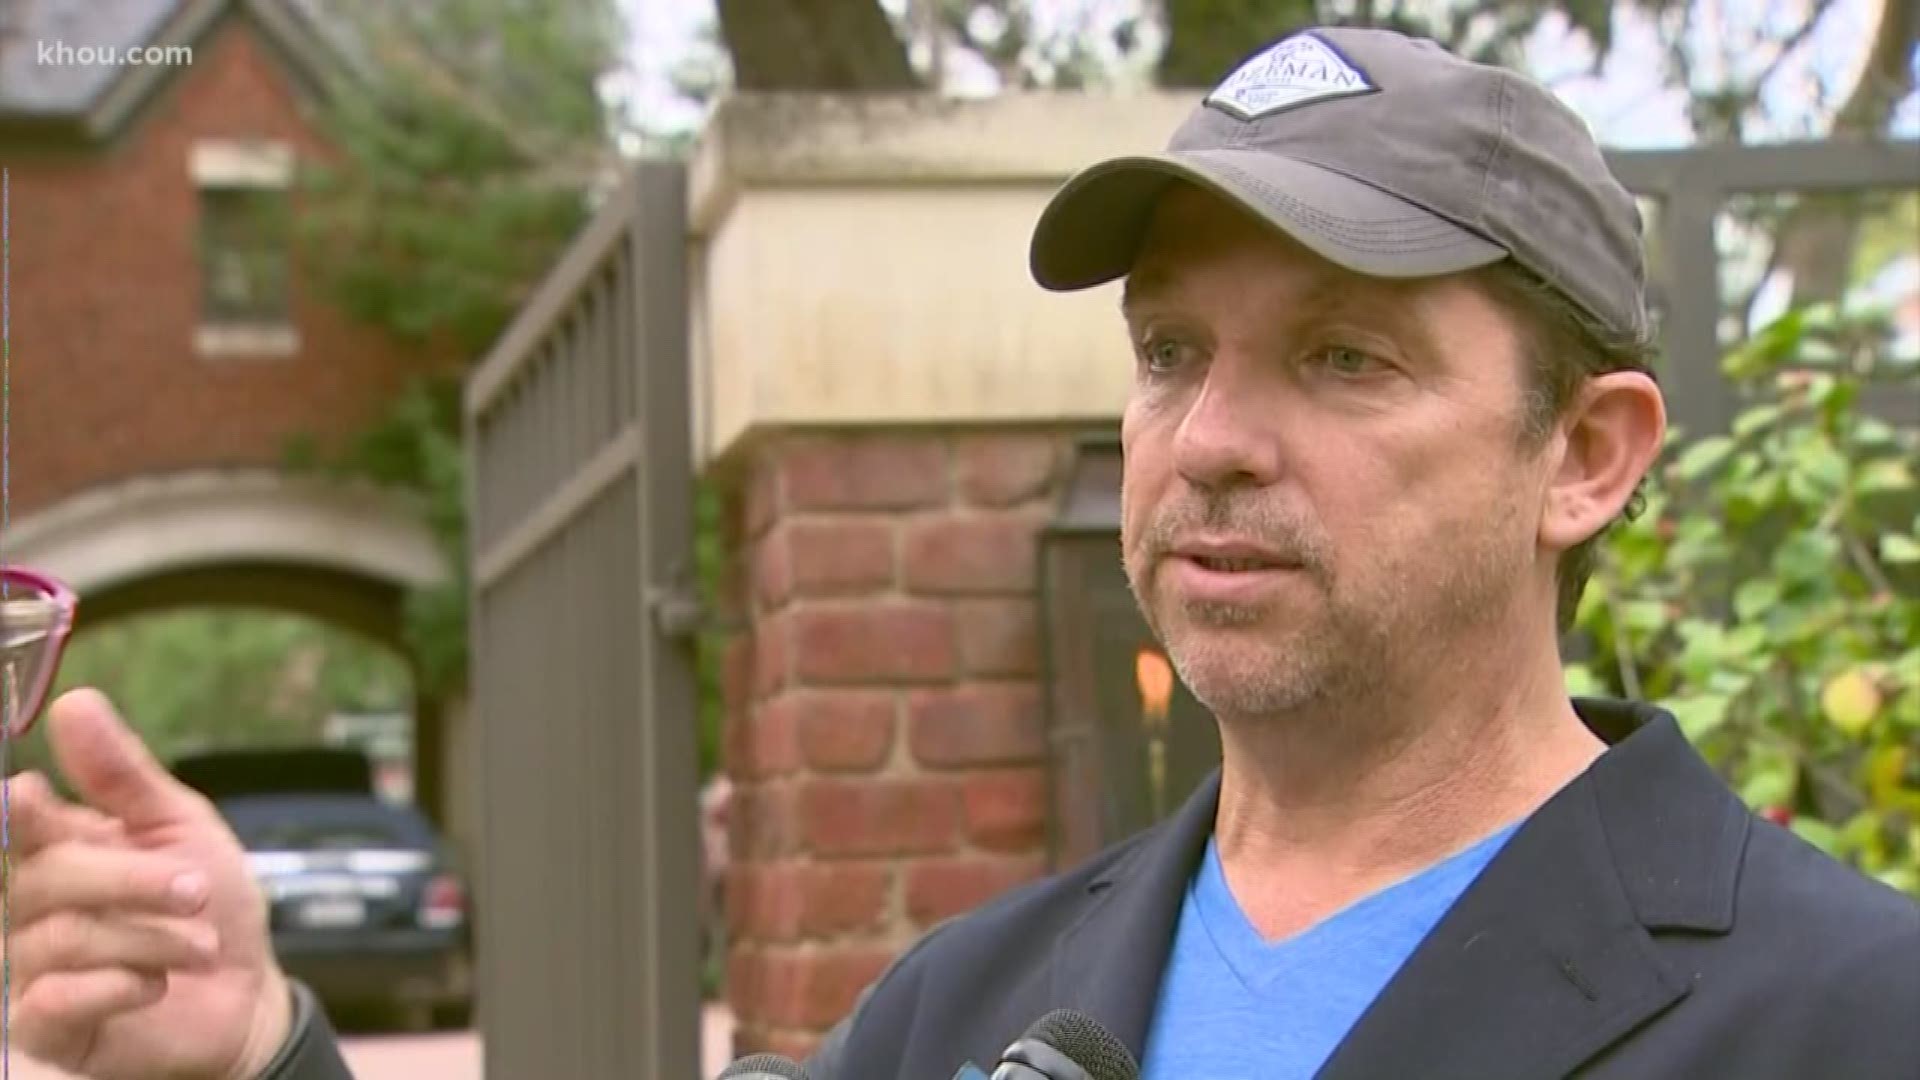 Houston mayoral candidate Tony Buzbee says he caught a robber inside his River Oaks mansion early Monday.